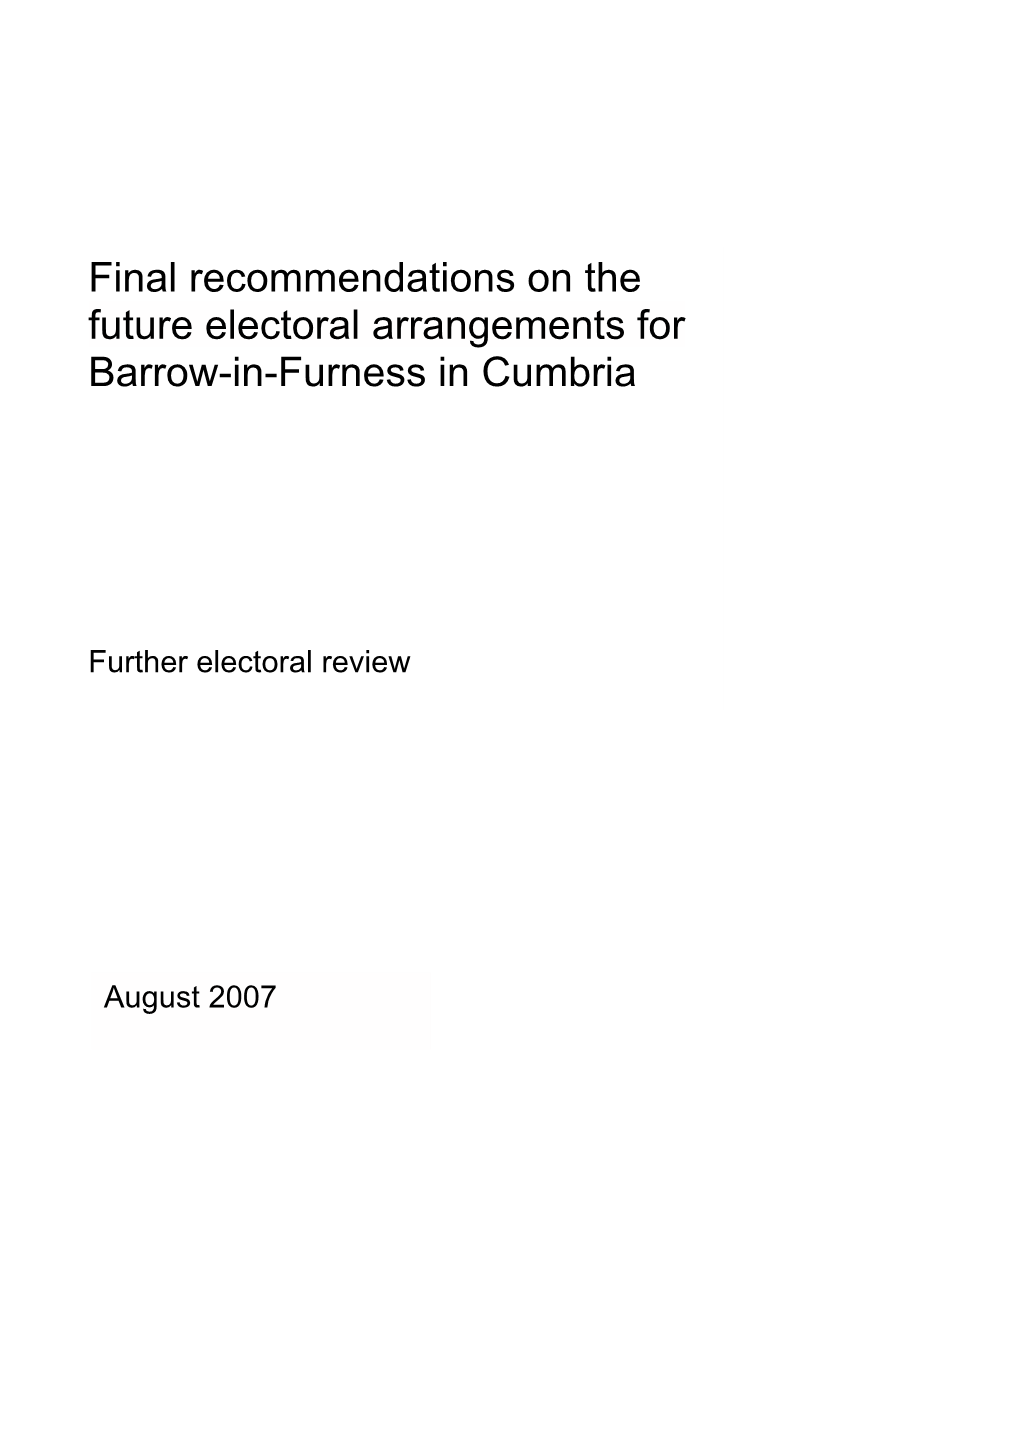 Final Recommendations on the Future Electoral Arrangements for Barrow-In-Furness in Cumbria